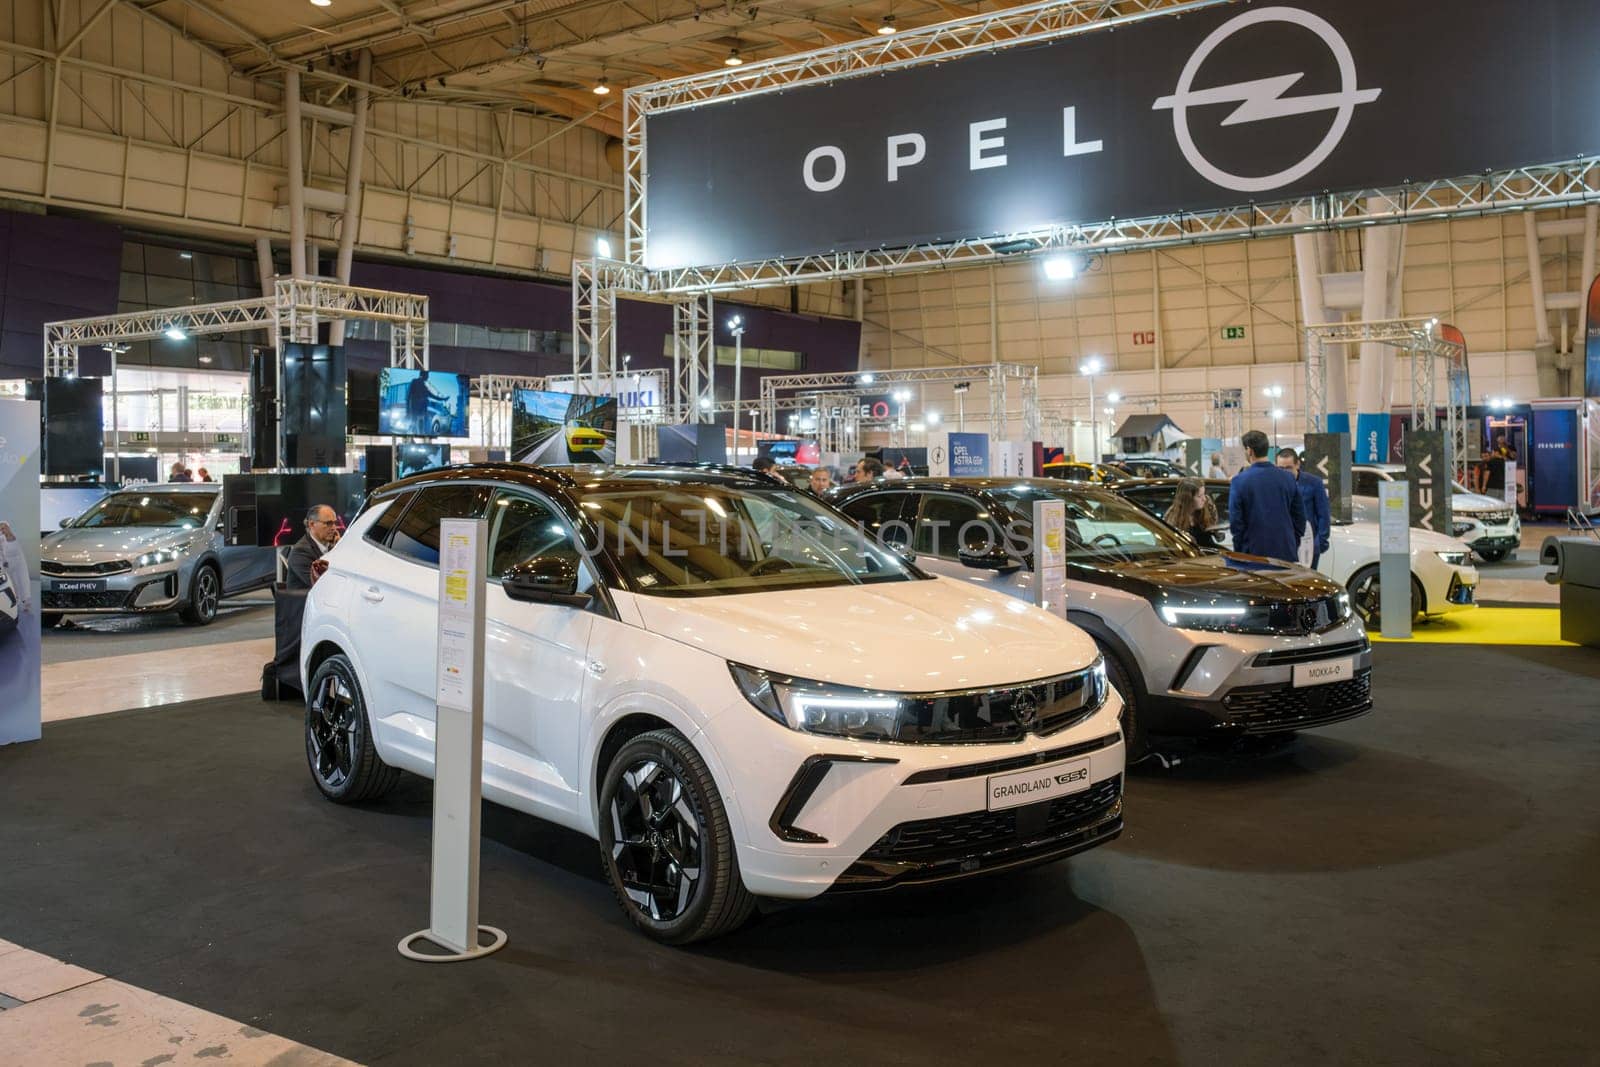 Opel Grandland GSe hybrid and Opel Mokka electric cars at ECAR SHOW - Hybrid and Electric Motor Show by dimol